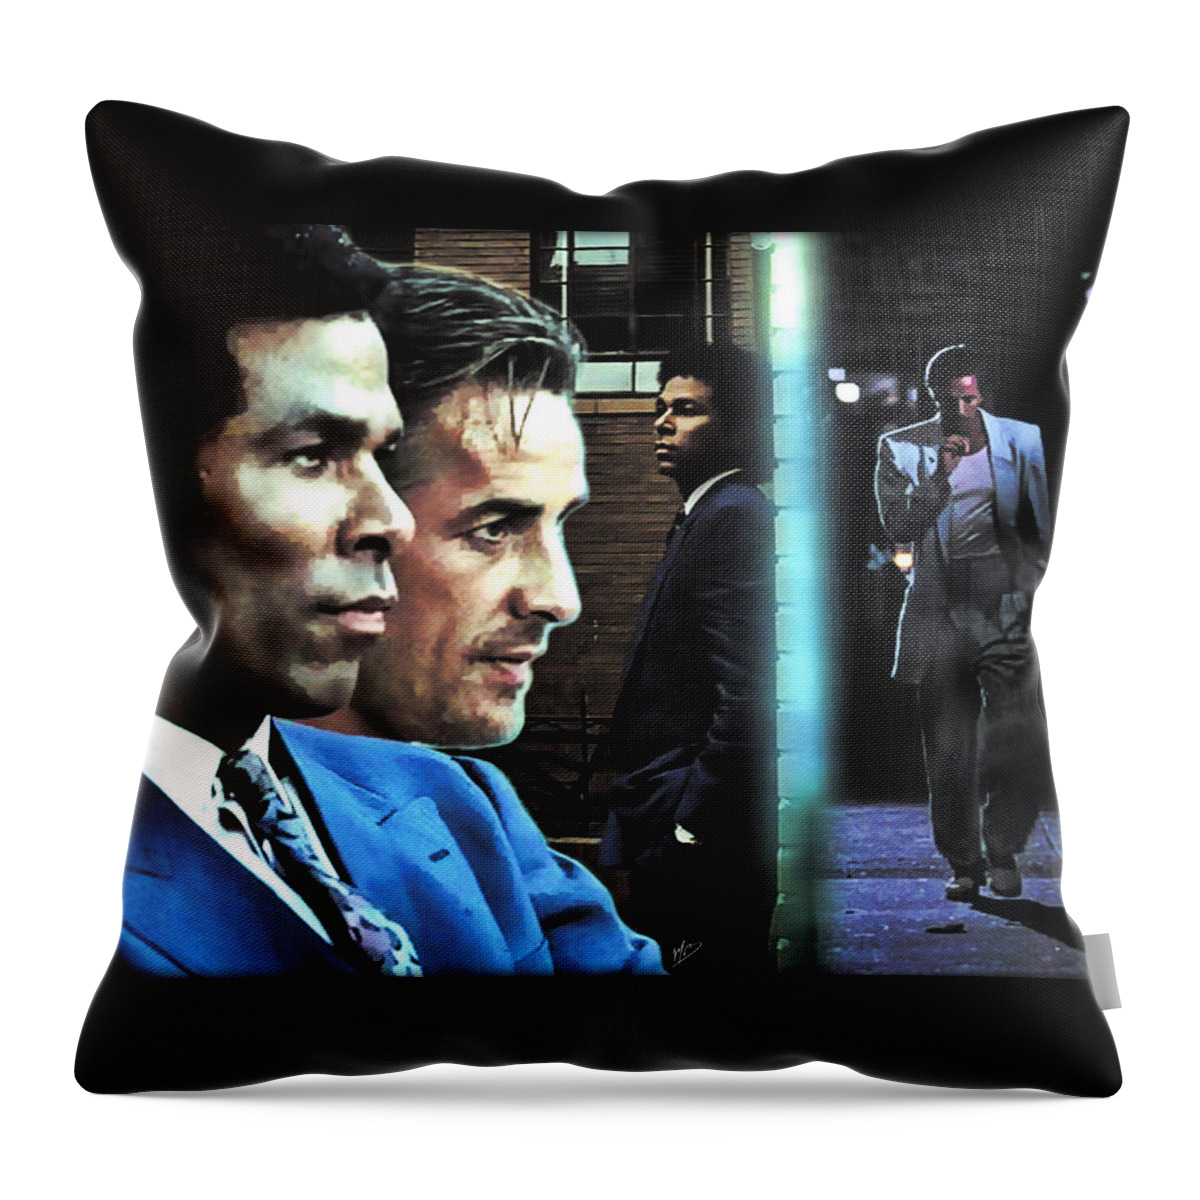 Miami Vice Throw Pillow featuring the digital art The Prodigal Son 5 by Mark Baranowski